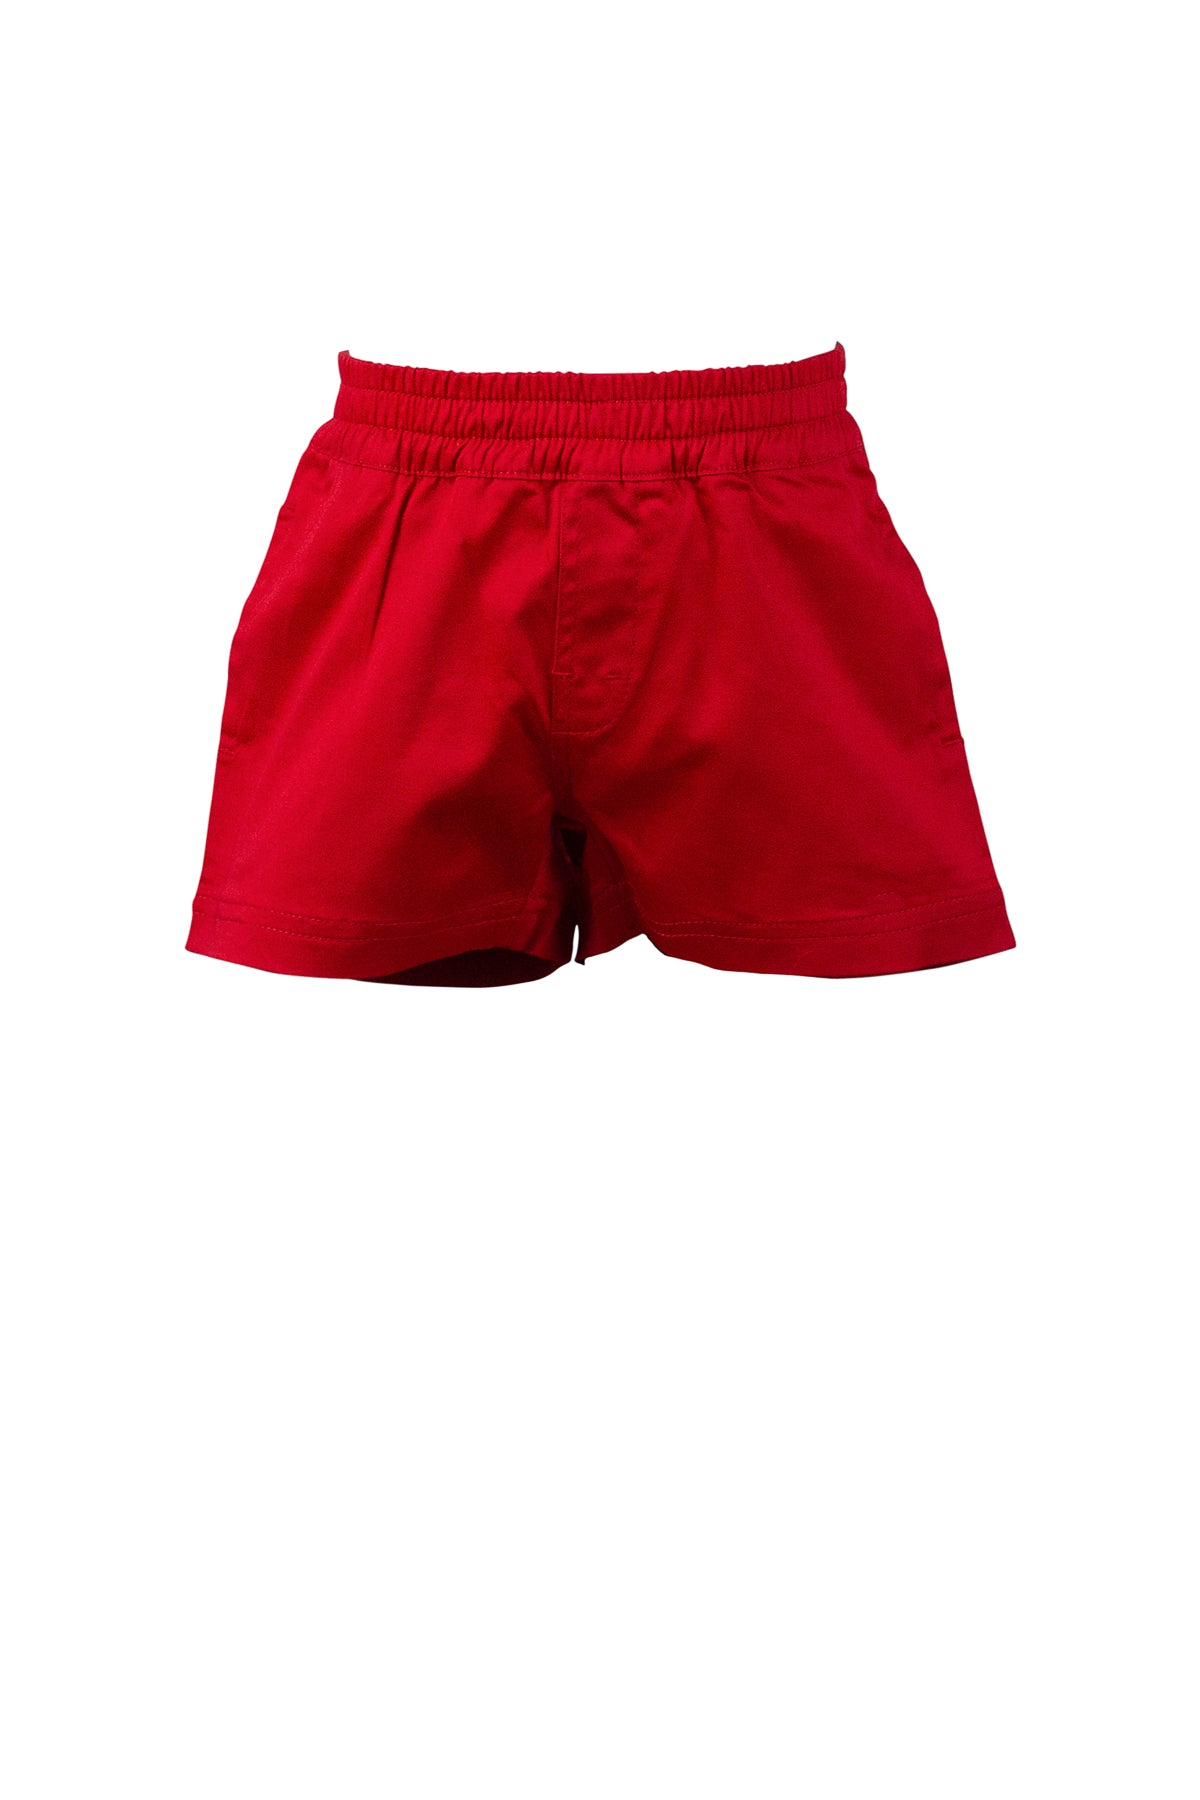 The Proper Peony Spencer Shorts- Red